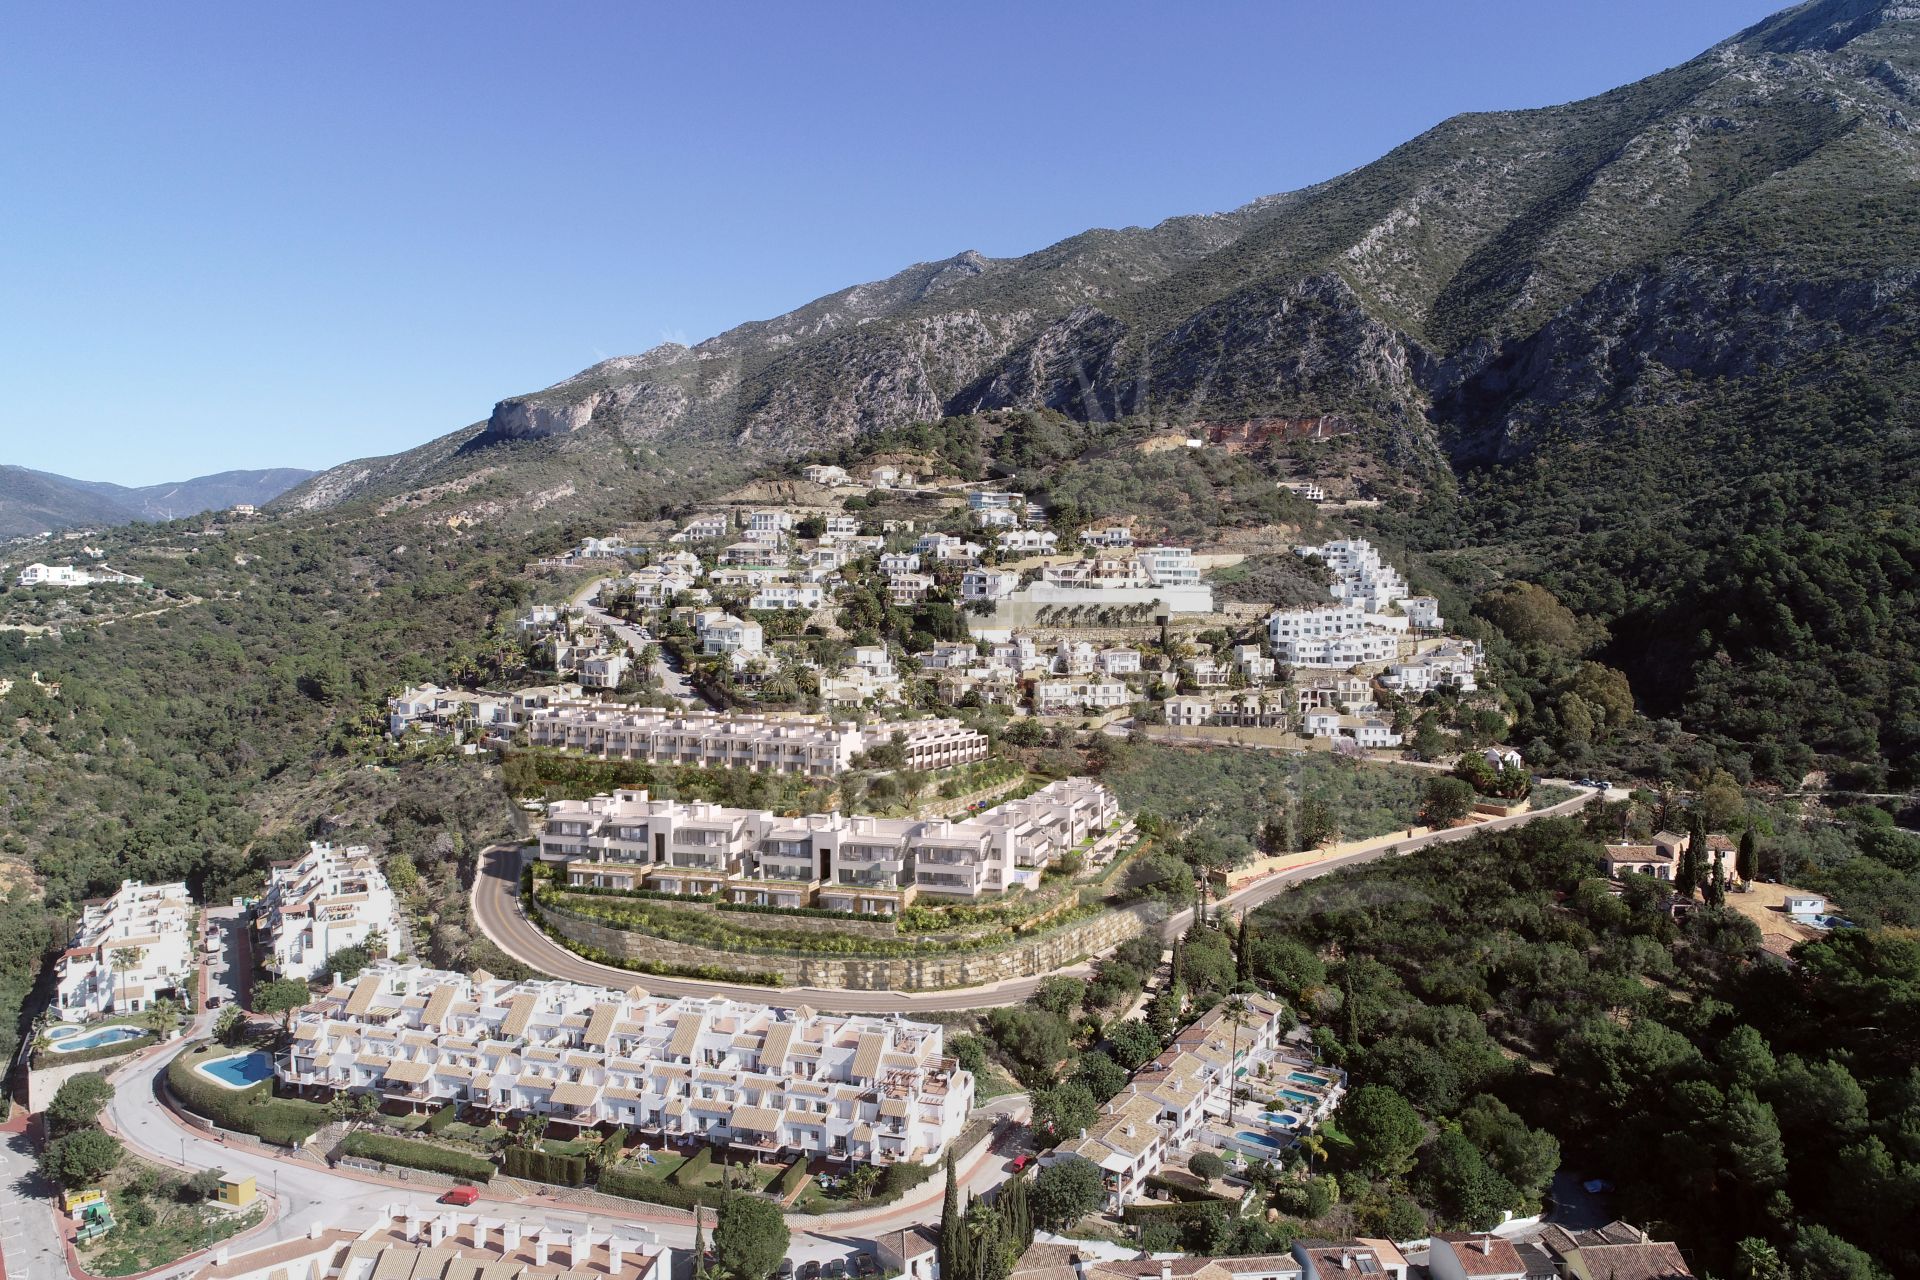 STUNNING NEW 3-BEDROOM DUPLEX PENTHOUSE APARTMENT CLOSE TO LAKE & NATURE, MARBELLA